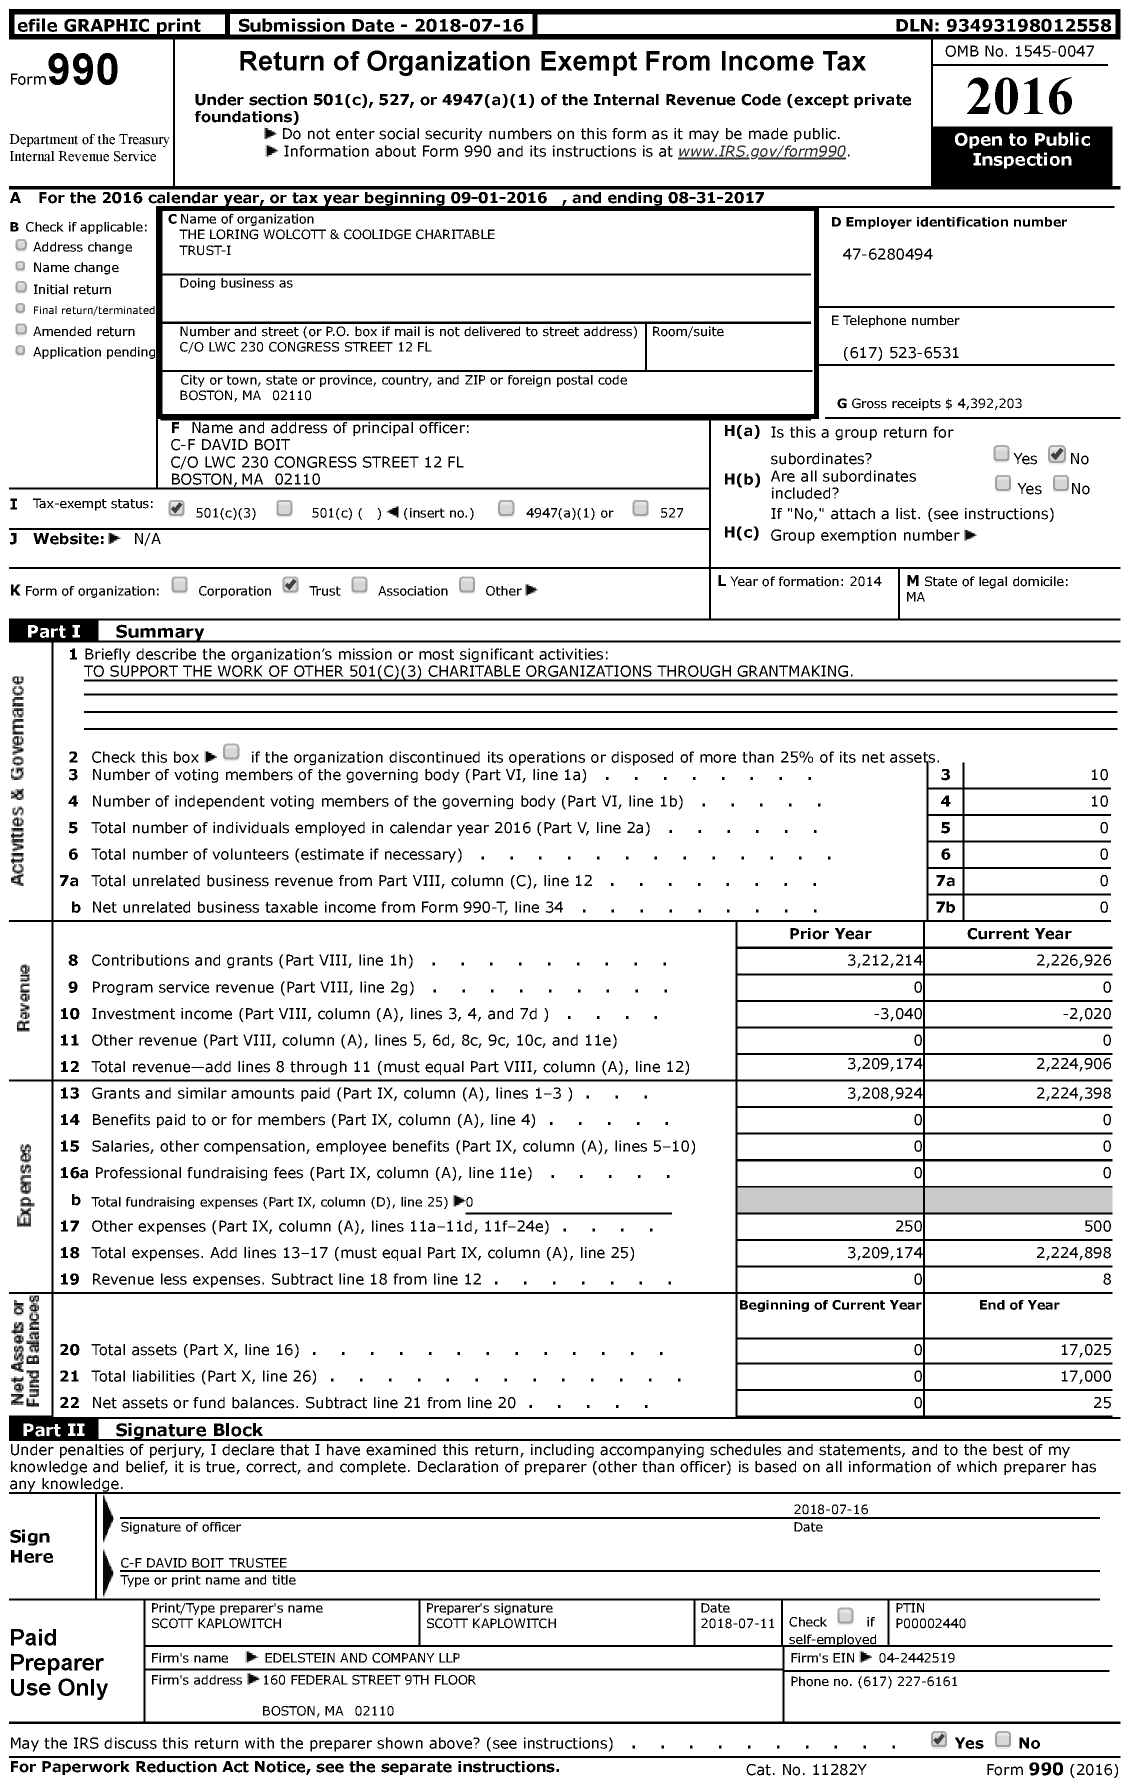 Image of first page of 2016 Form 990 for Loring, Wolcott & Coolidge